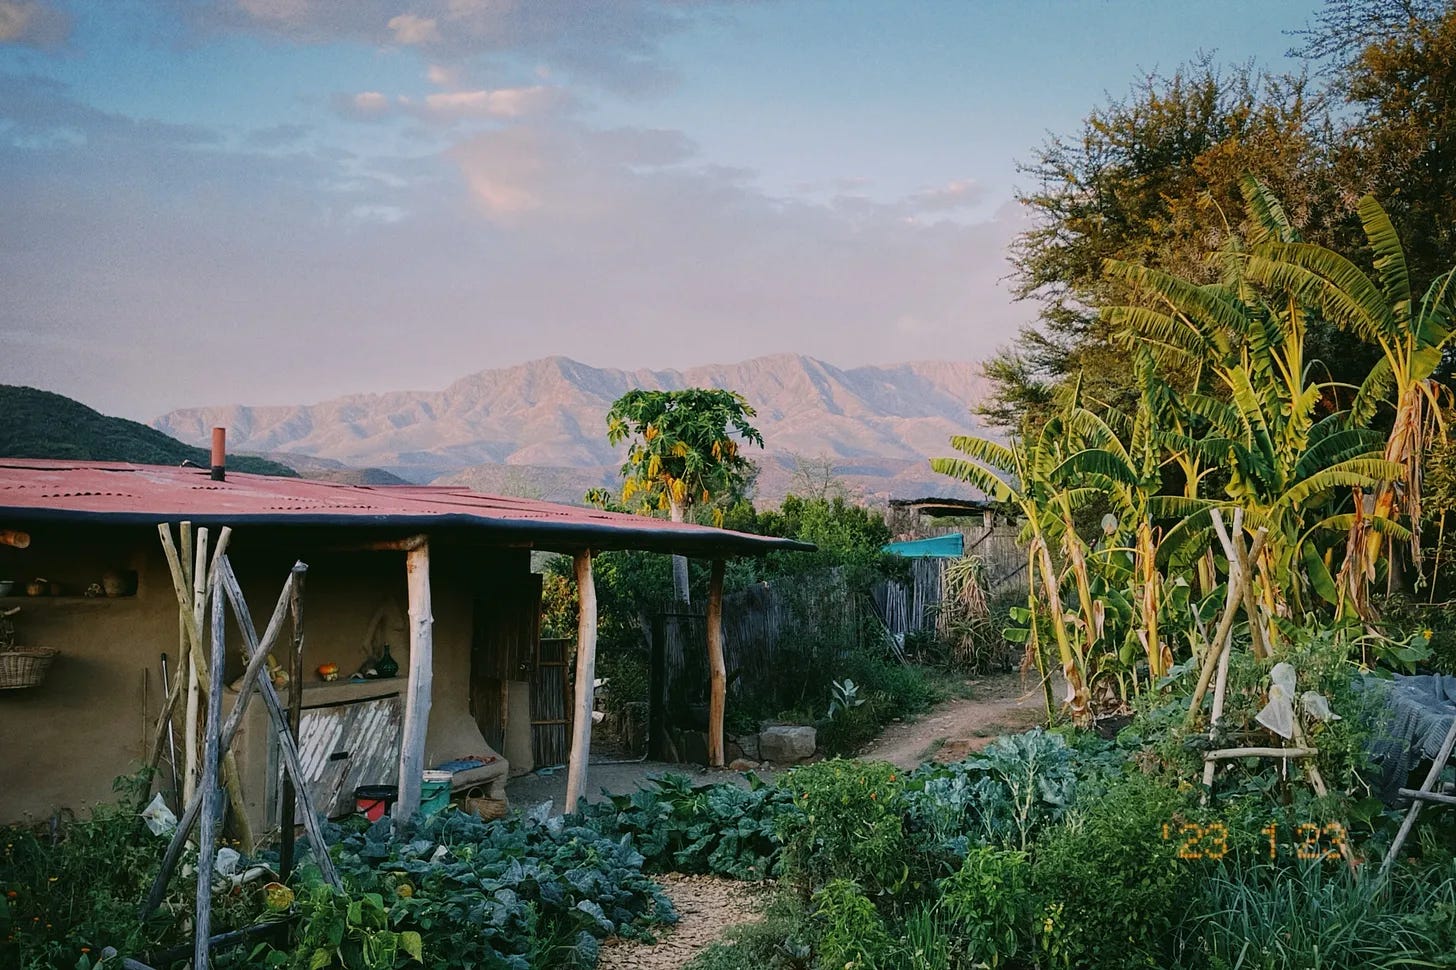 numbi valley permaculture farm in the klein karoo, south africa